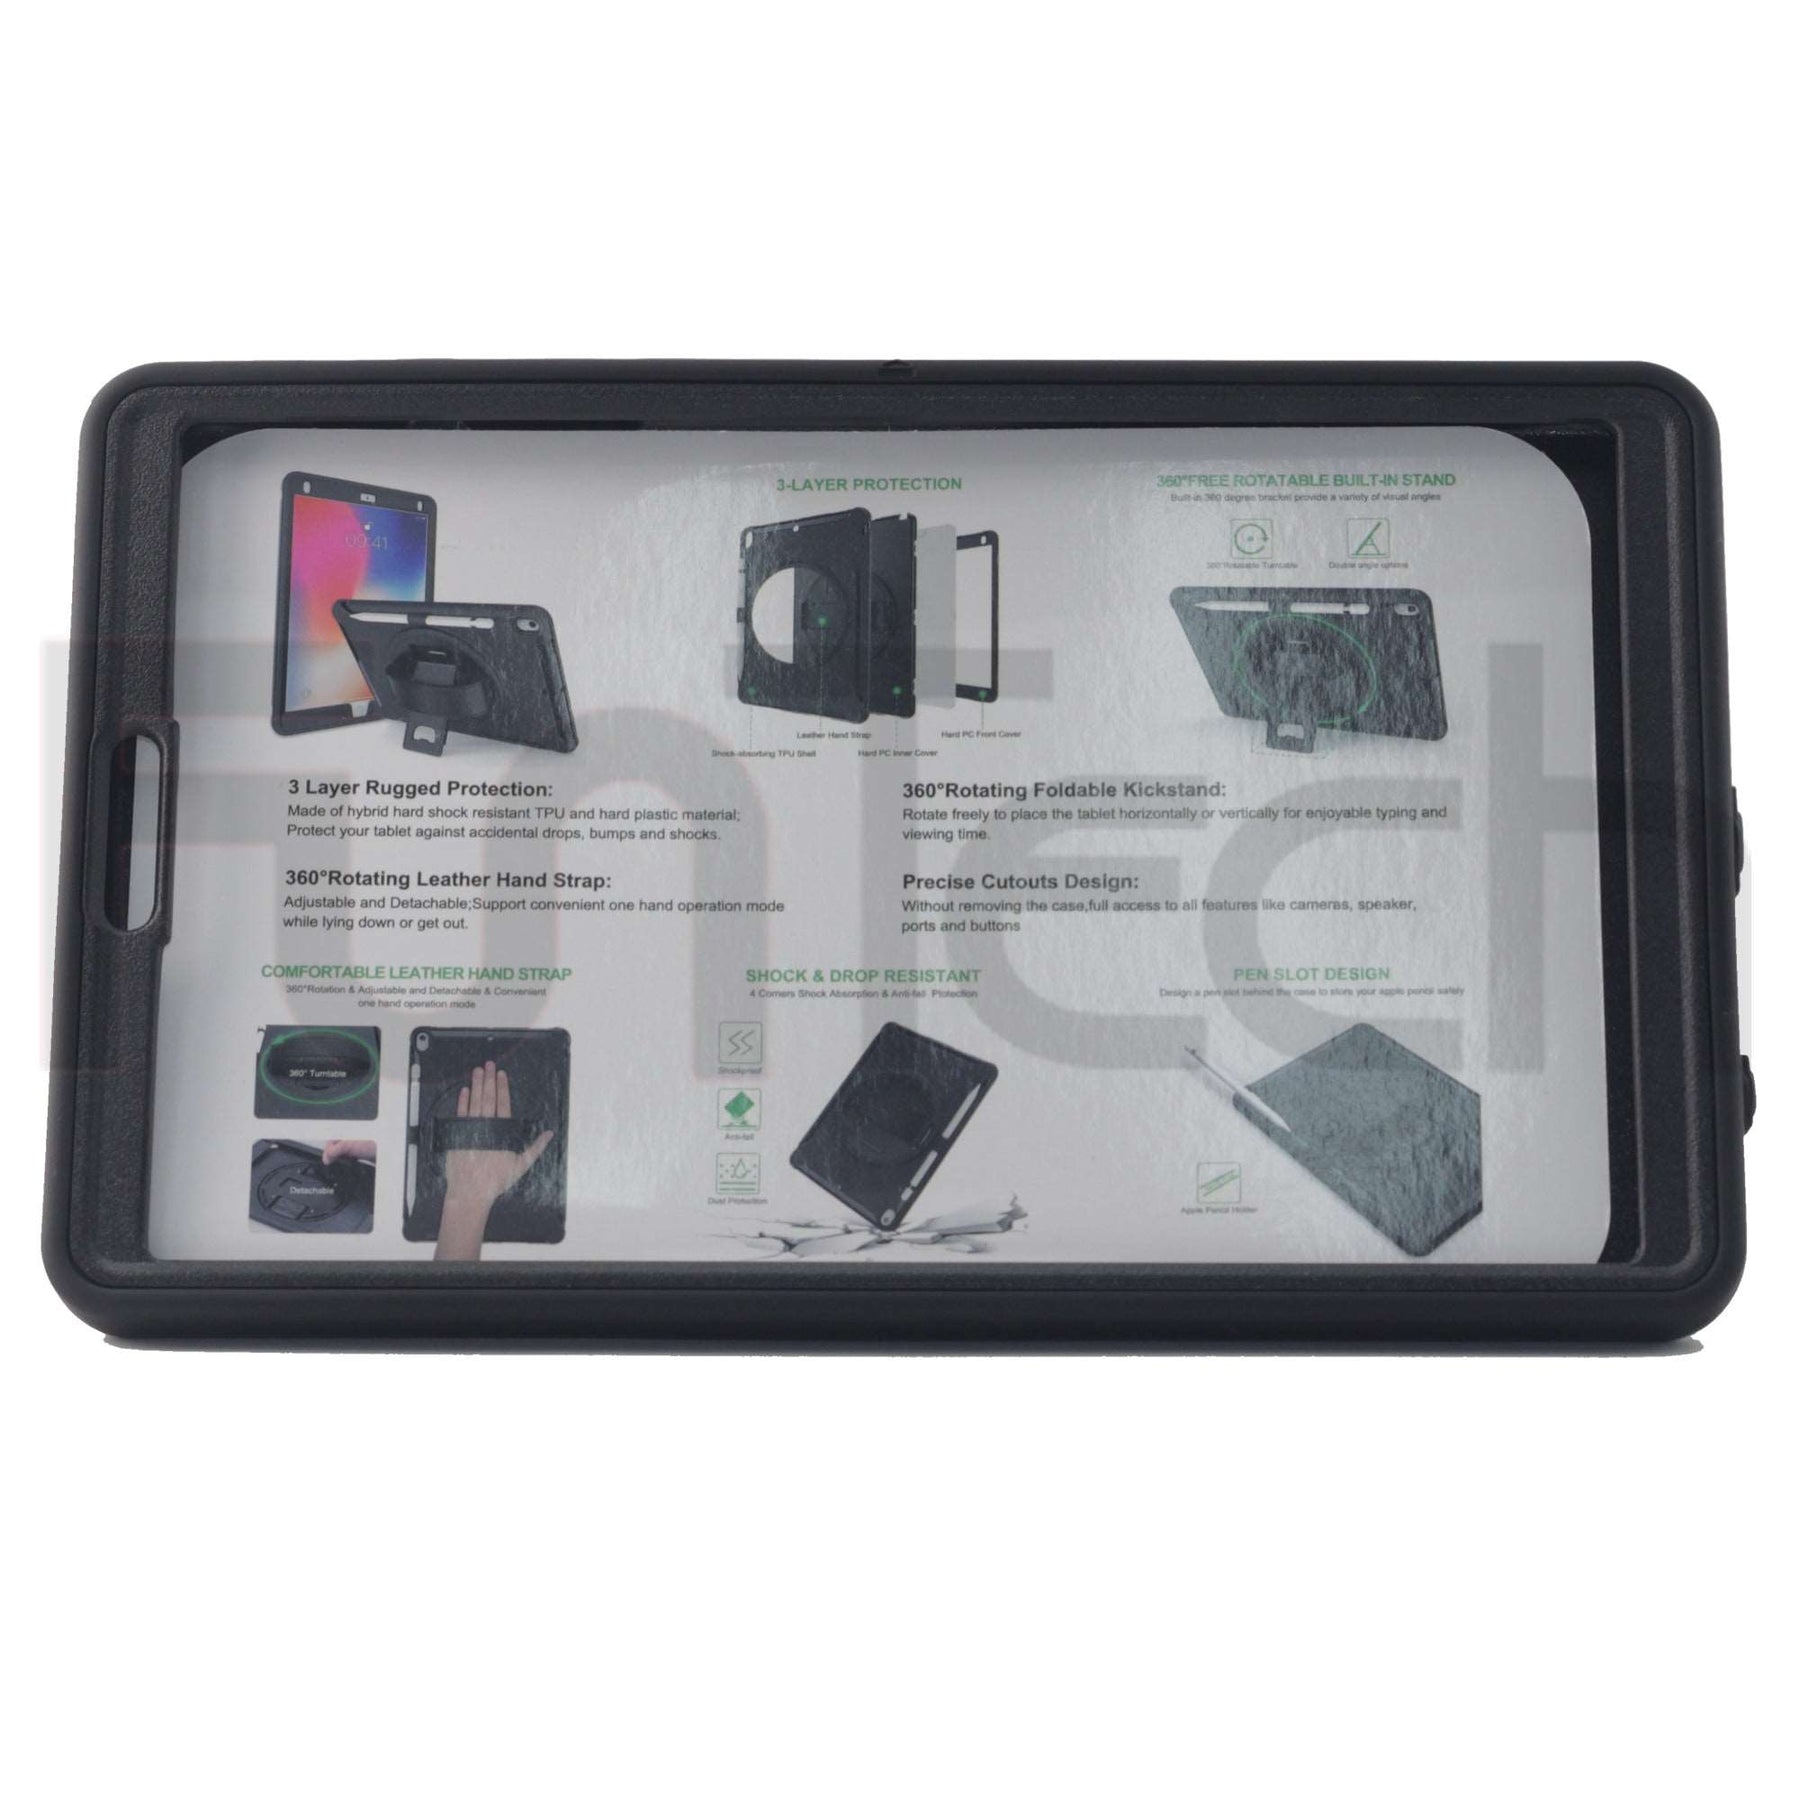 Drop & Shock Proof Samsung Tab Case For - Tab A7 Lite 8.7 inch, T220/T225, Color Black.